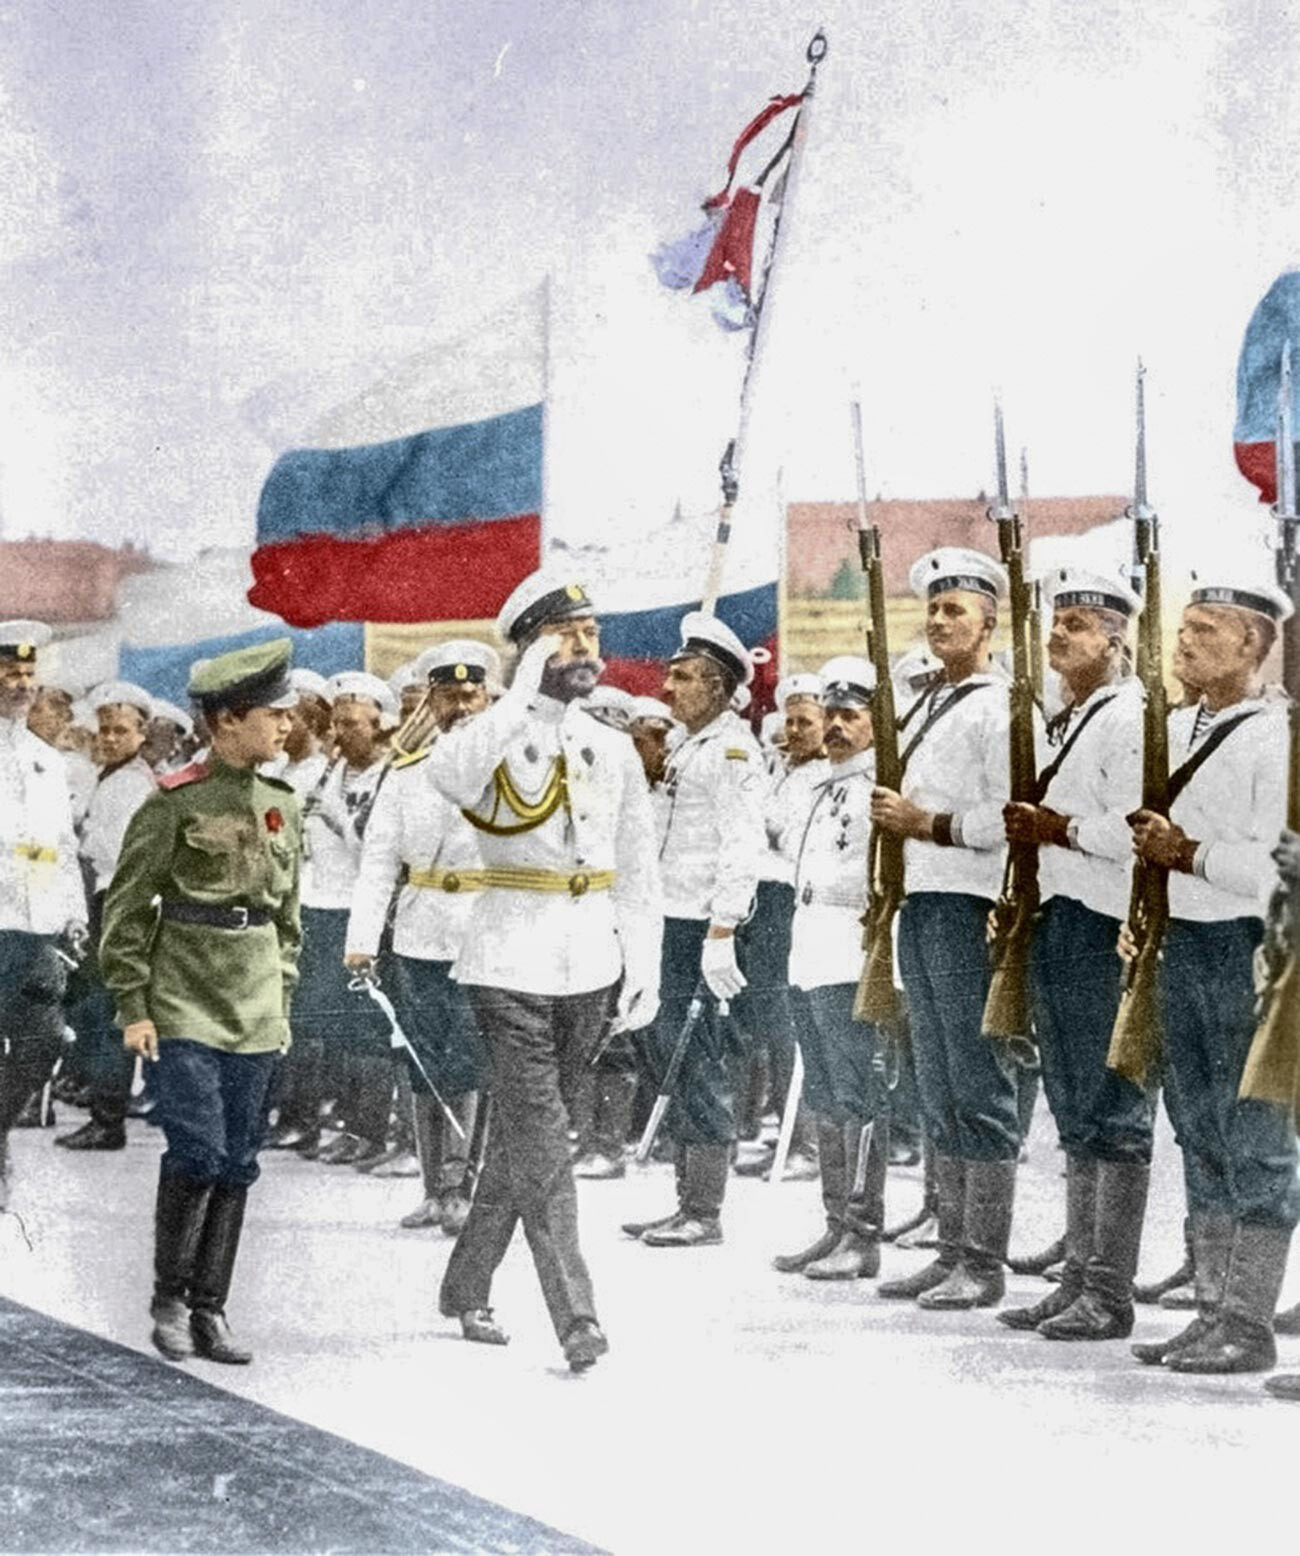 Russia Beyond on X: #OTD in 1918, the Russian tricolor flag was replaced  with the red Soviet flag, until 1991    / X